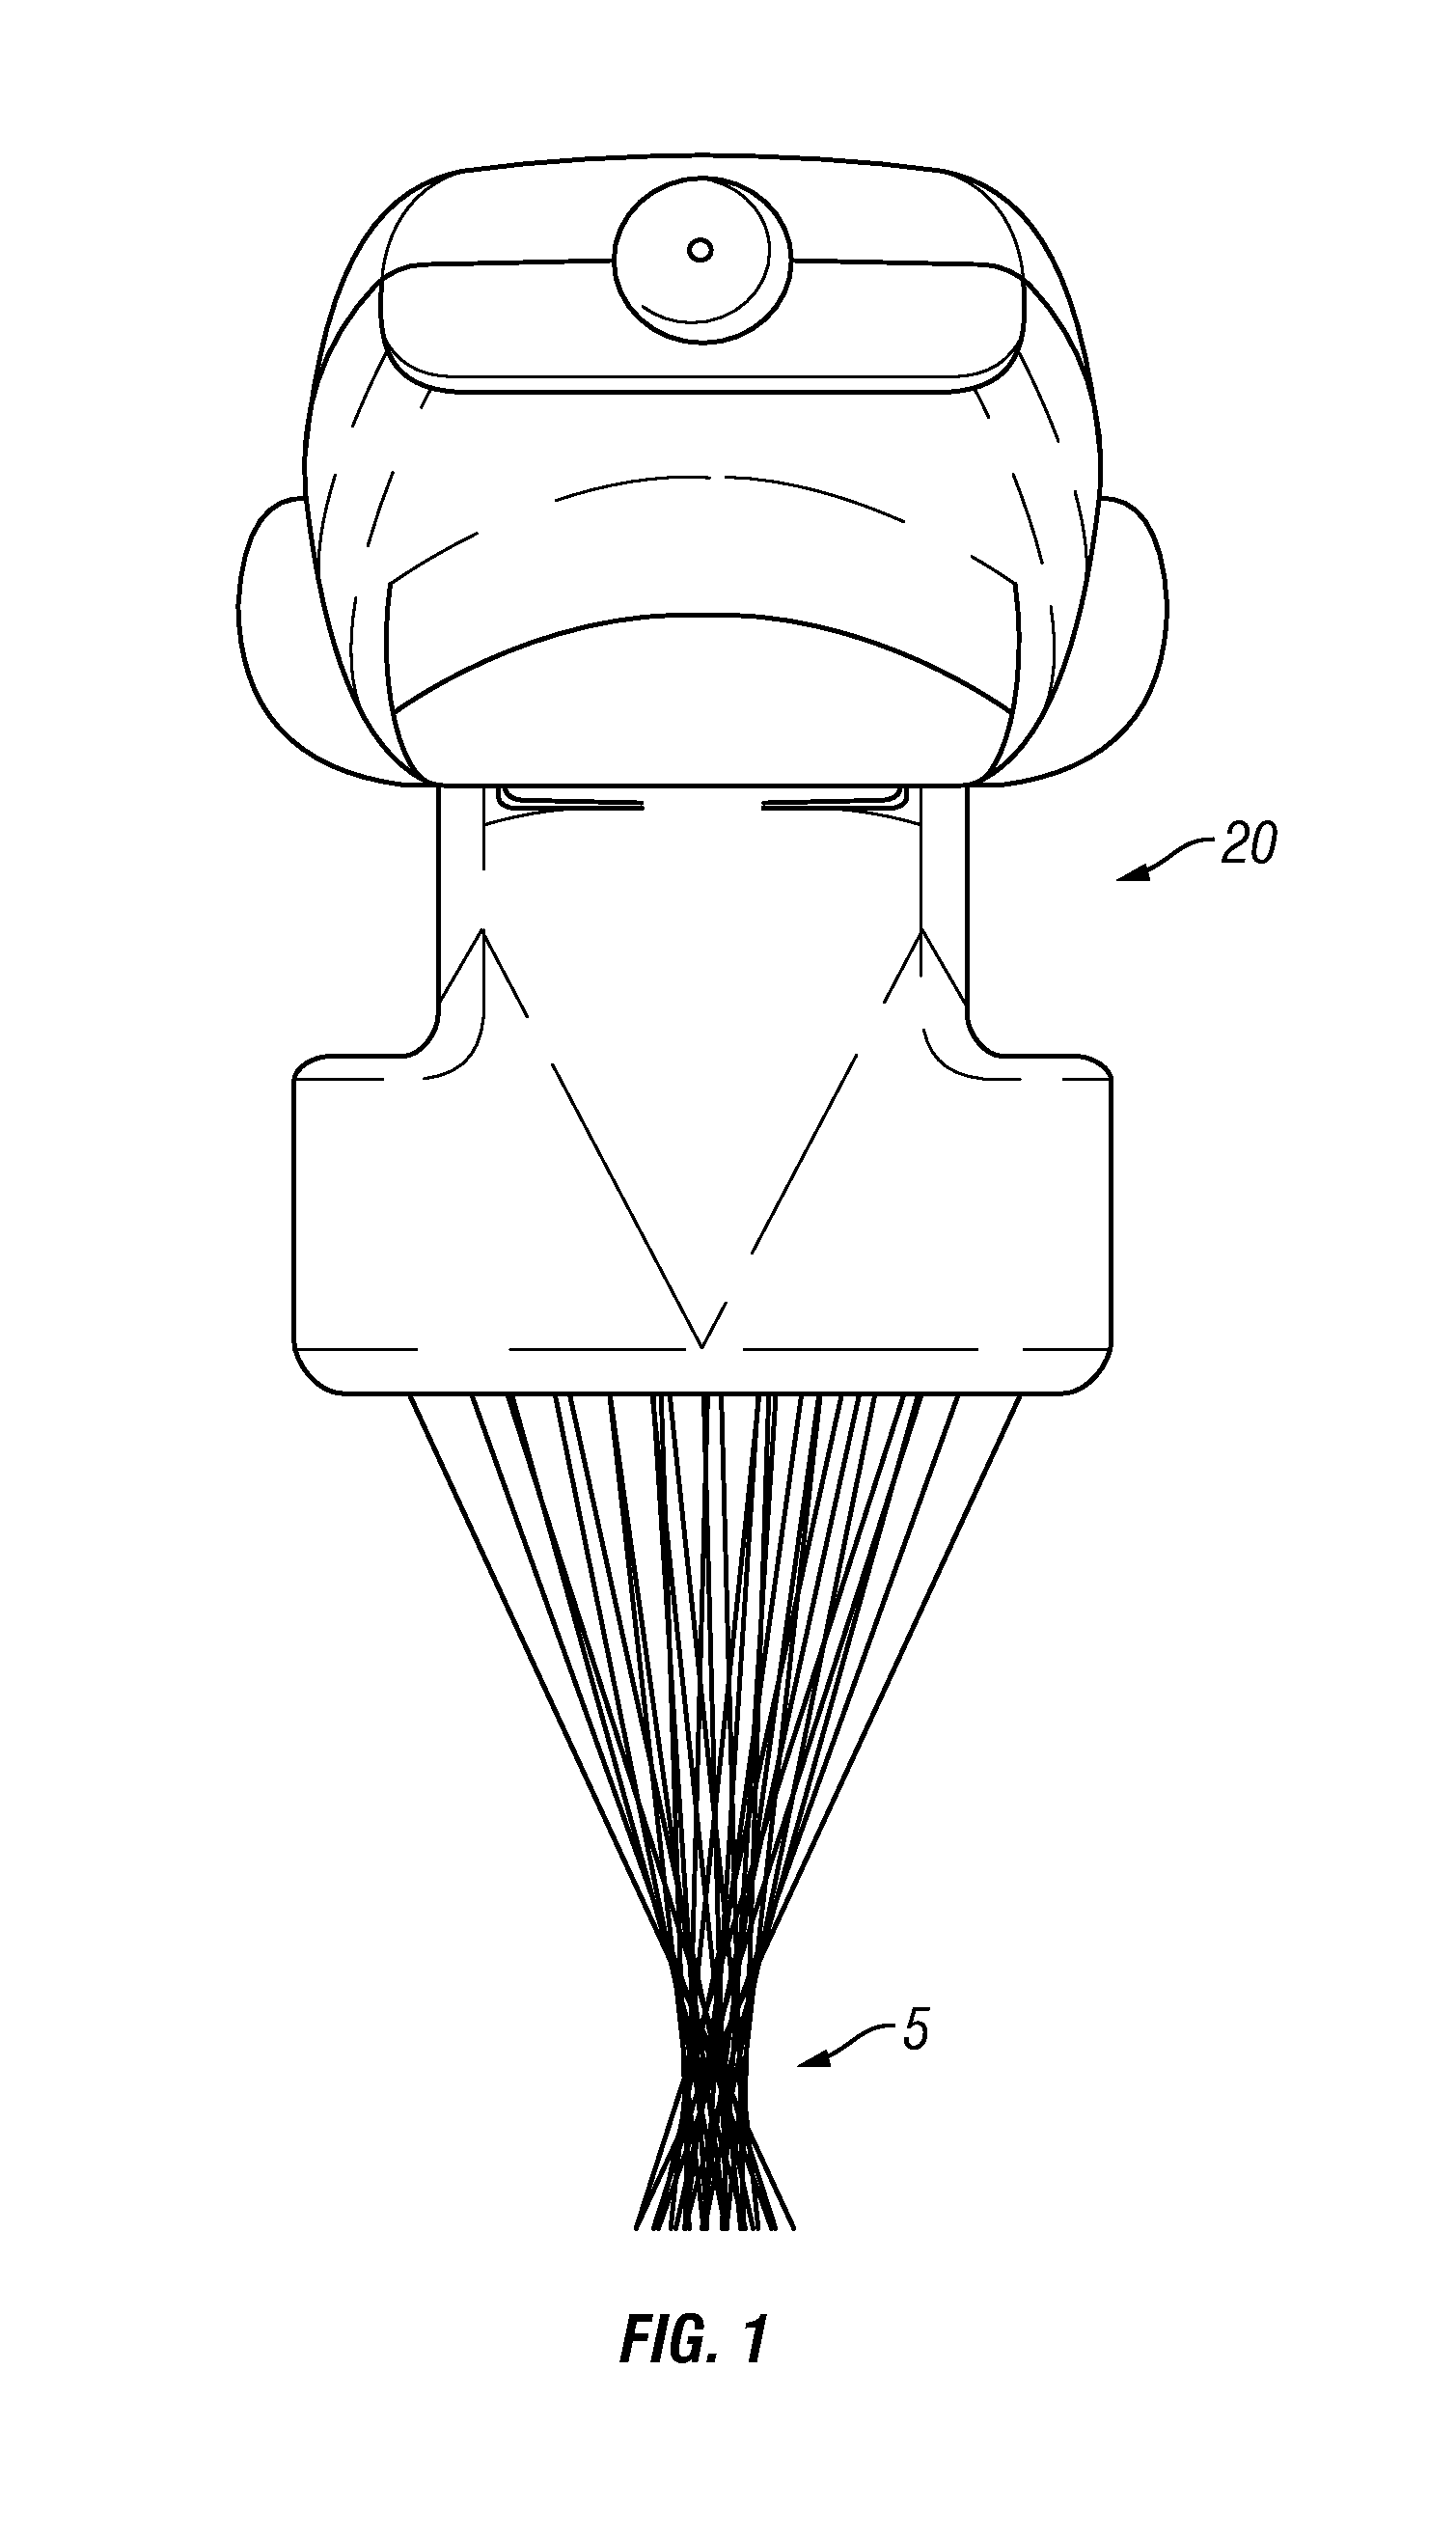 Systems and methods for sealing a vascular opening